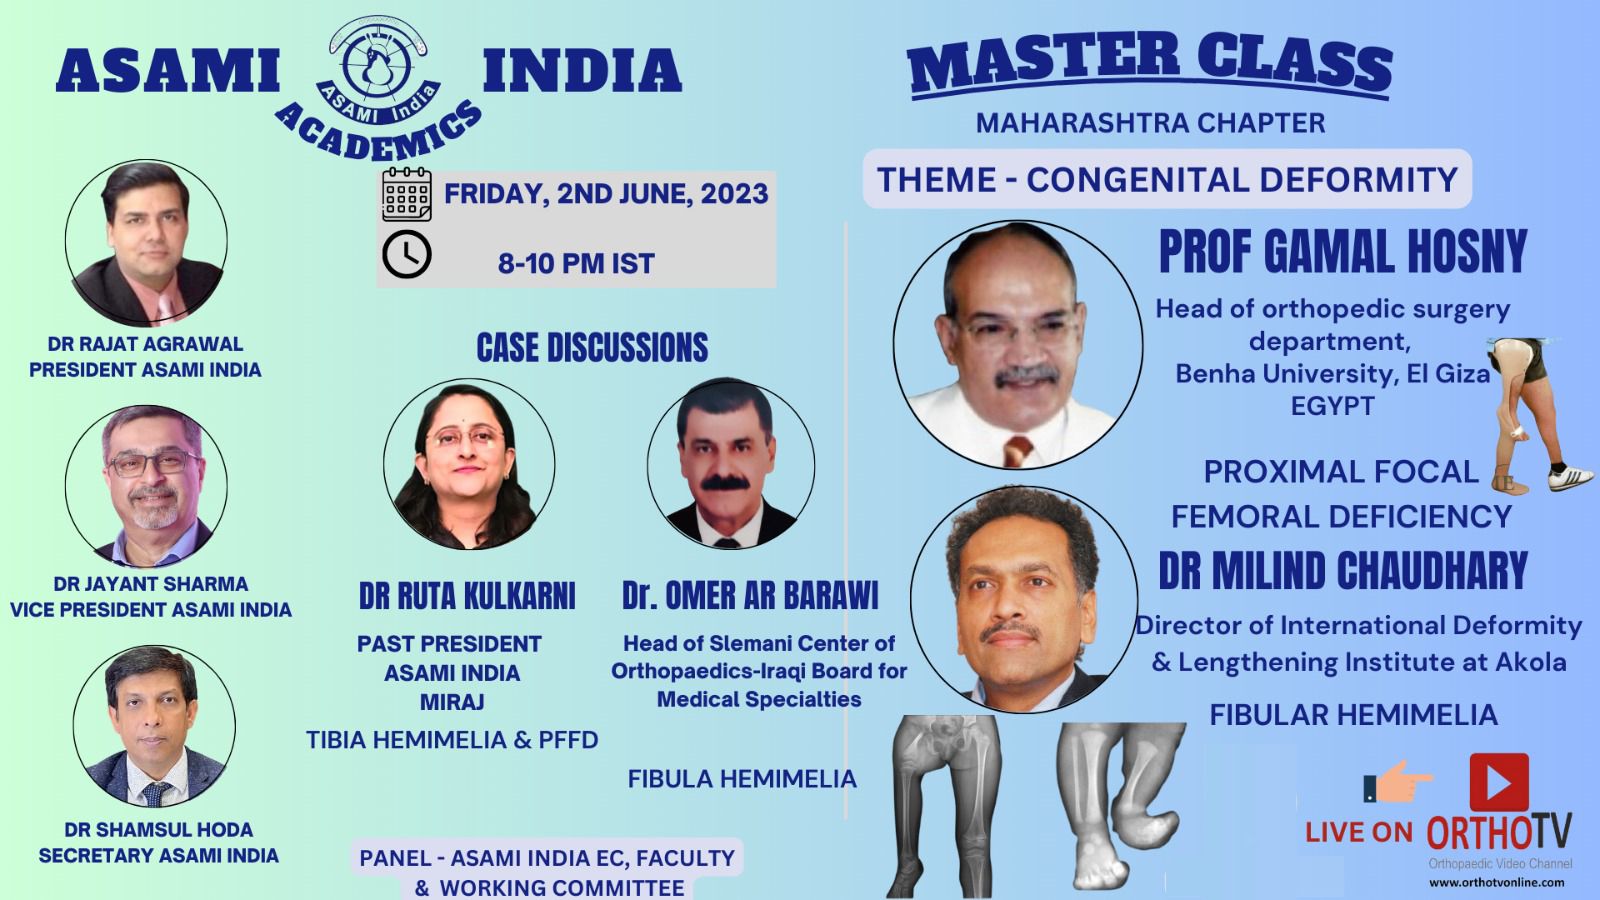 ASAMI INDIA ACADEMICS- MASTERS CLASS - PROF GAMAL HOSNY & DR MILIND CHAUDHARY